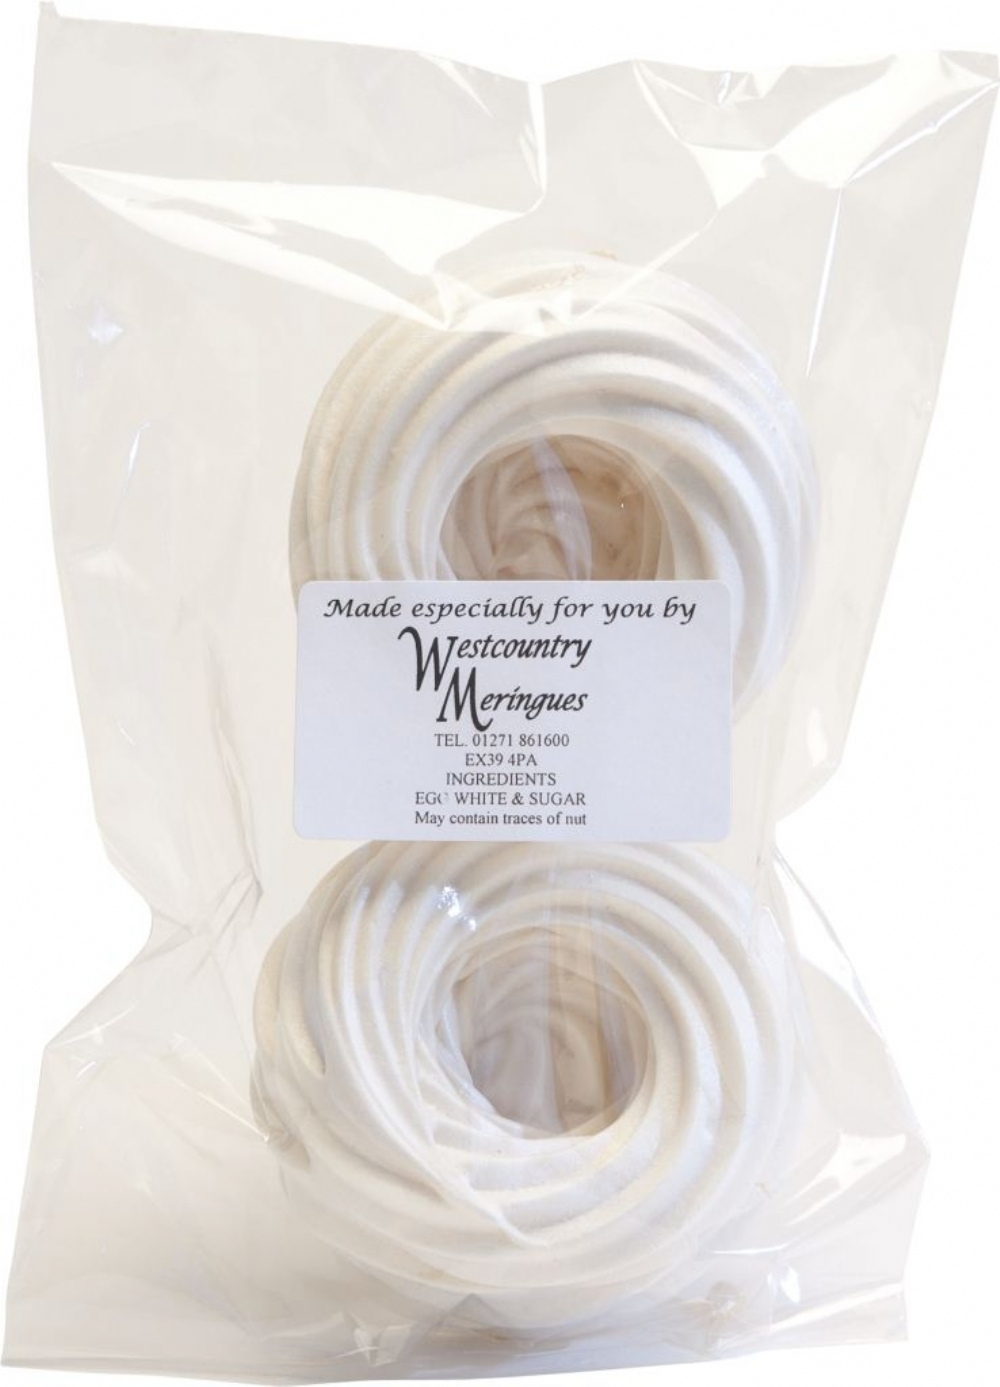 WEST COUNTRY 2 Large Meringue Nests - Cello